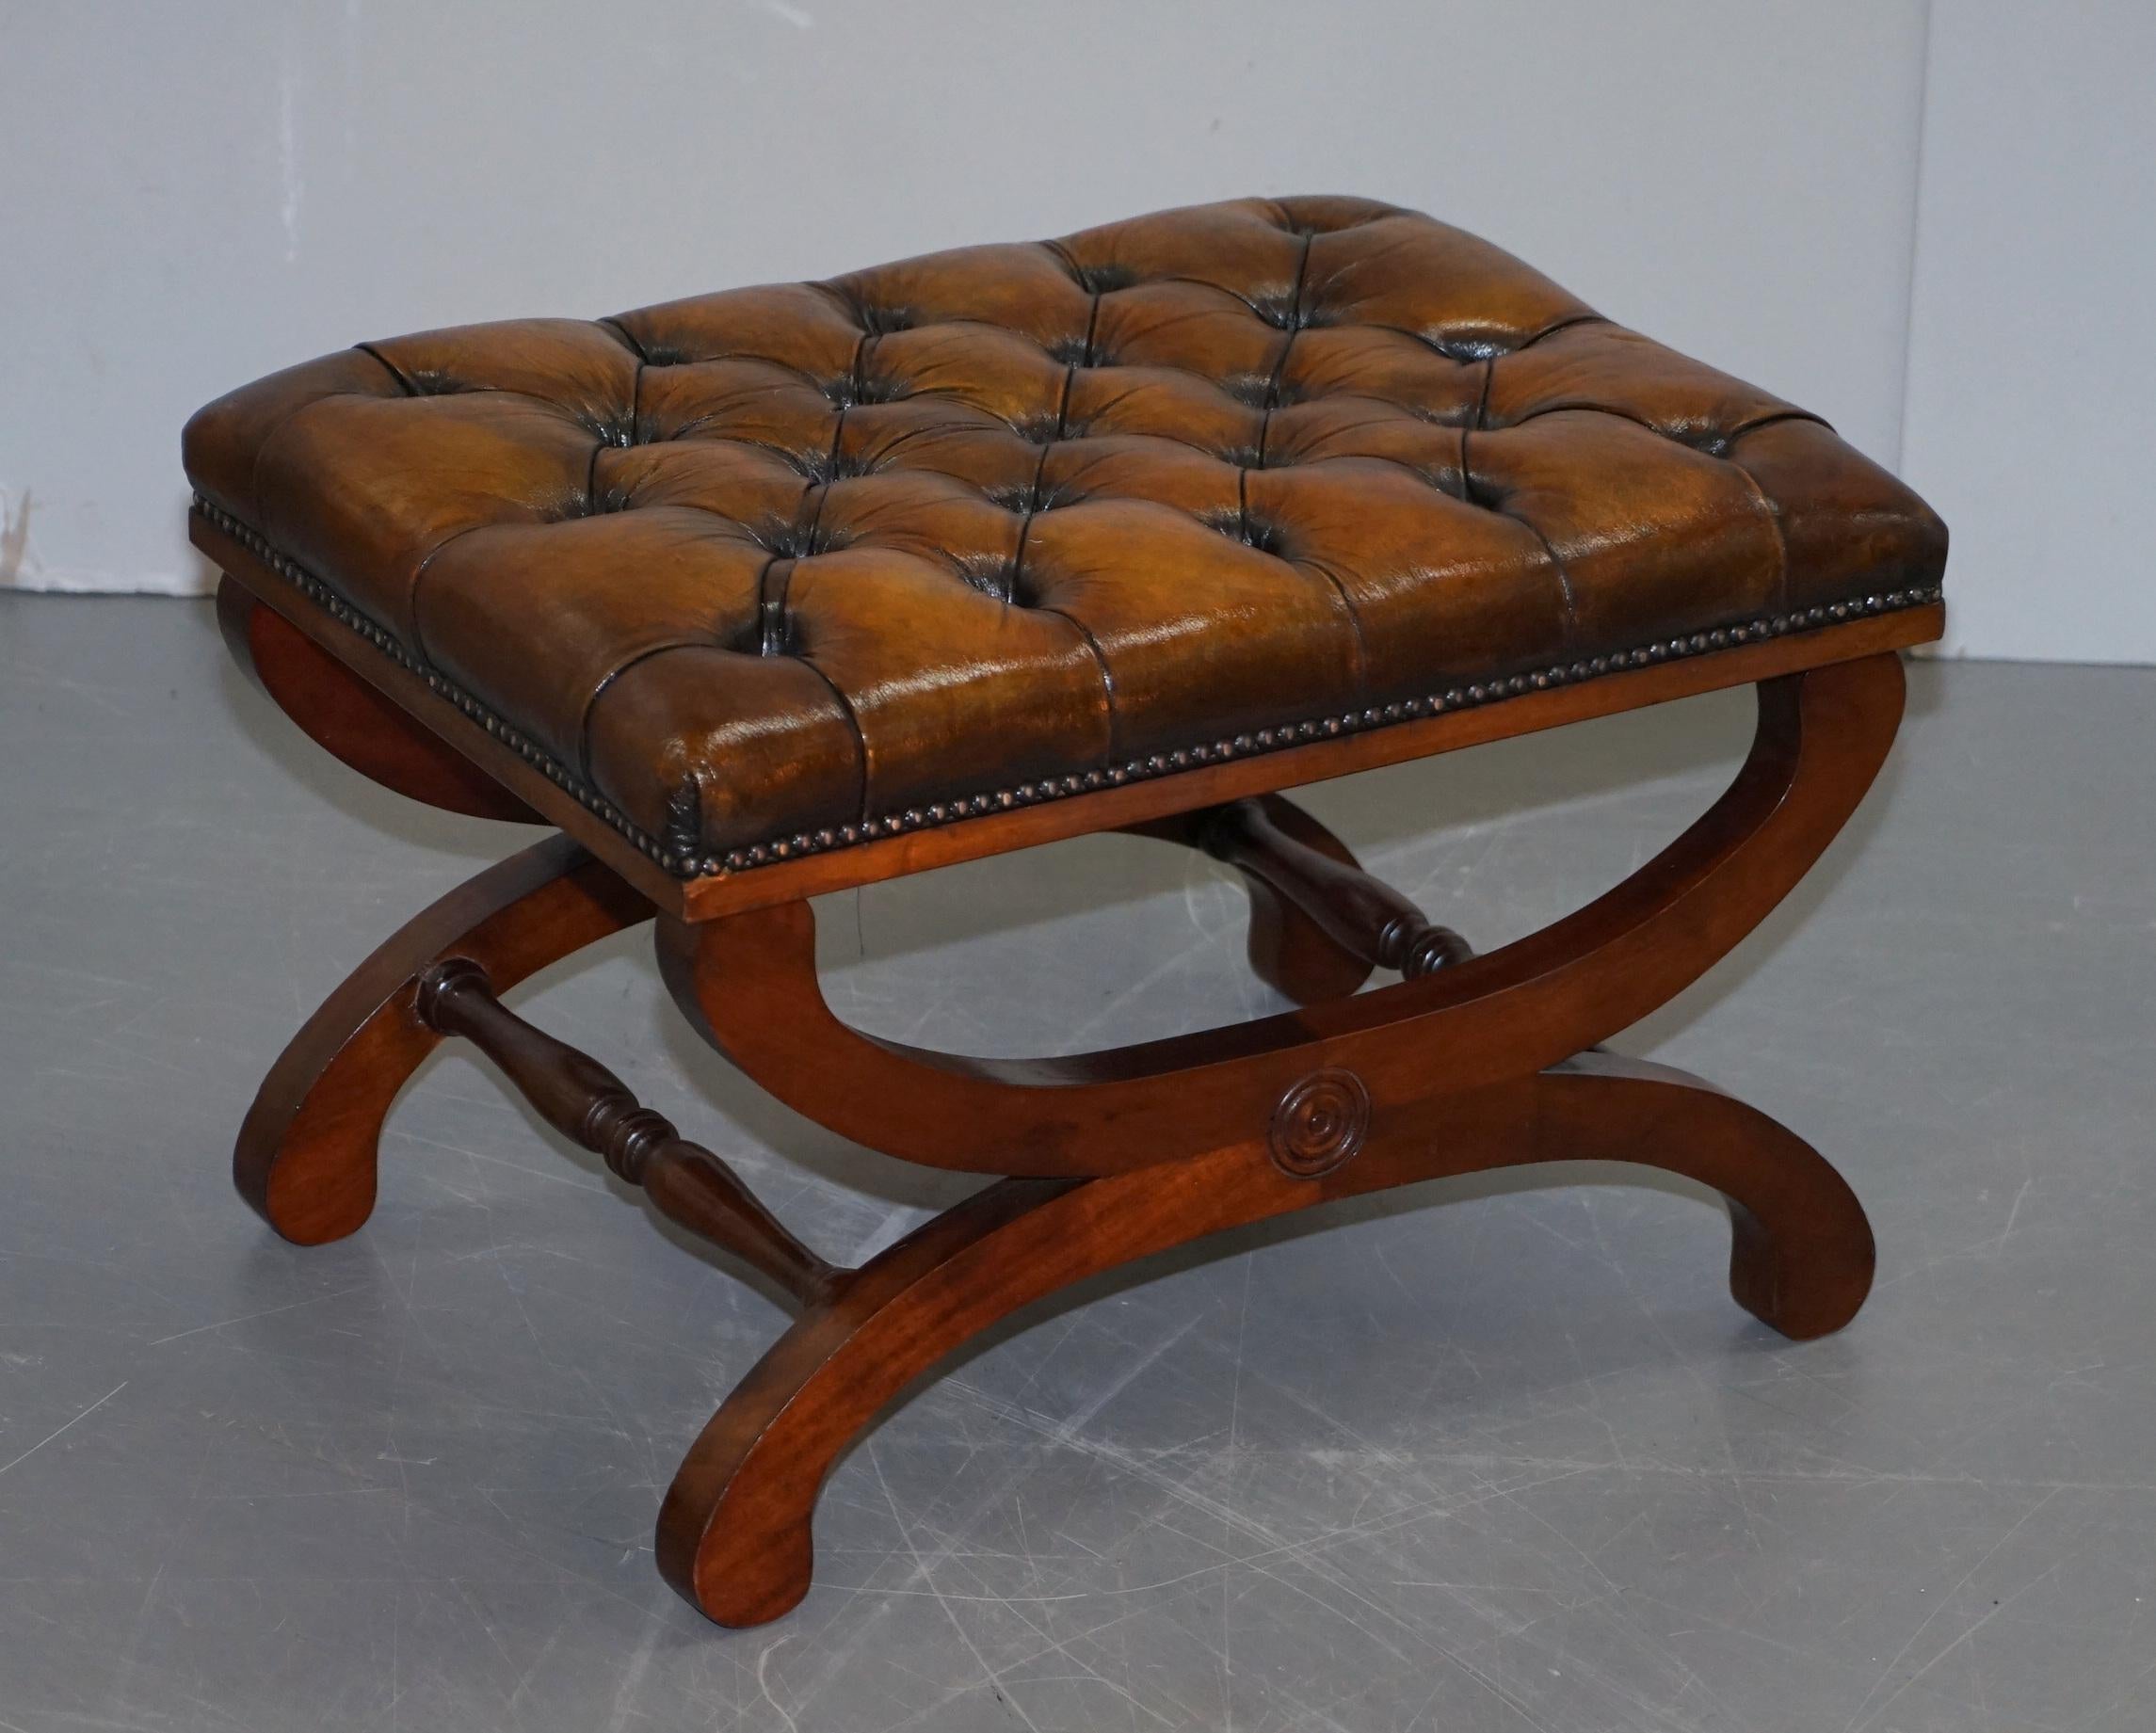 Wimbledon-Furniture

Wimbledon-Furniture is delighted to offer for sale this sublime pair of vintage fully restored Whisky Brown leather Chesterfield footstools

A very good looking and comfortable pair of stools, the leather has been stripped